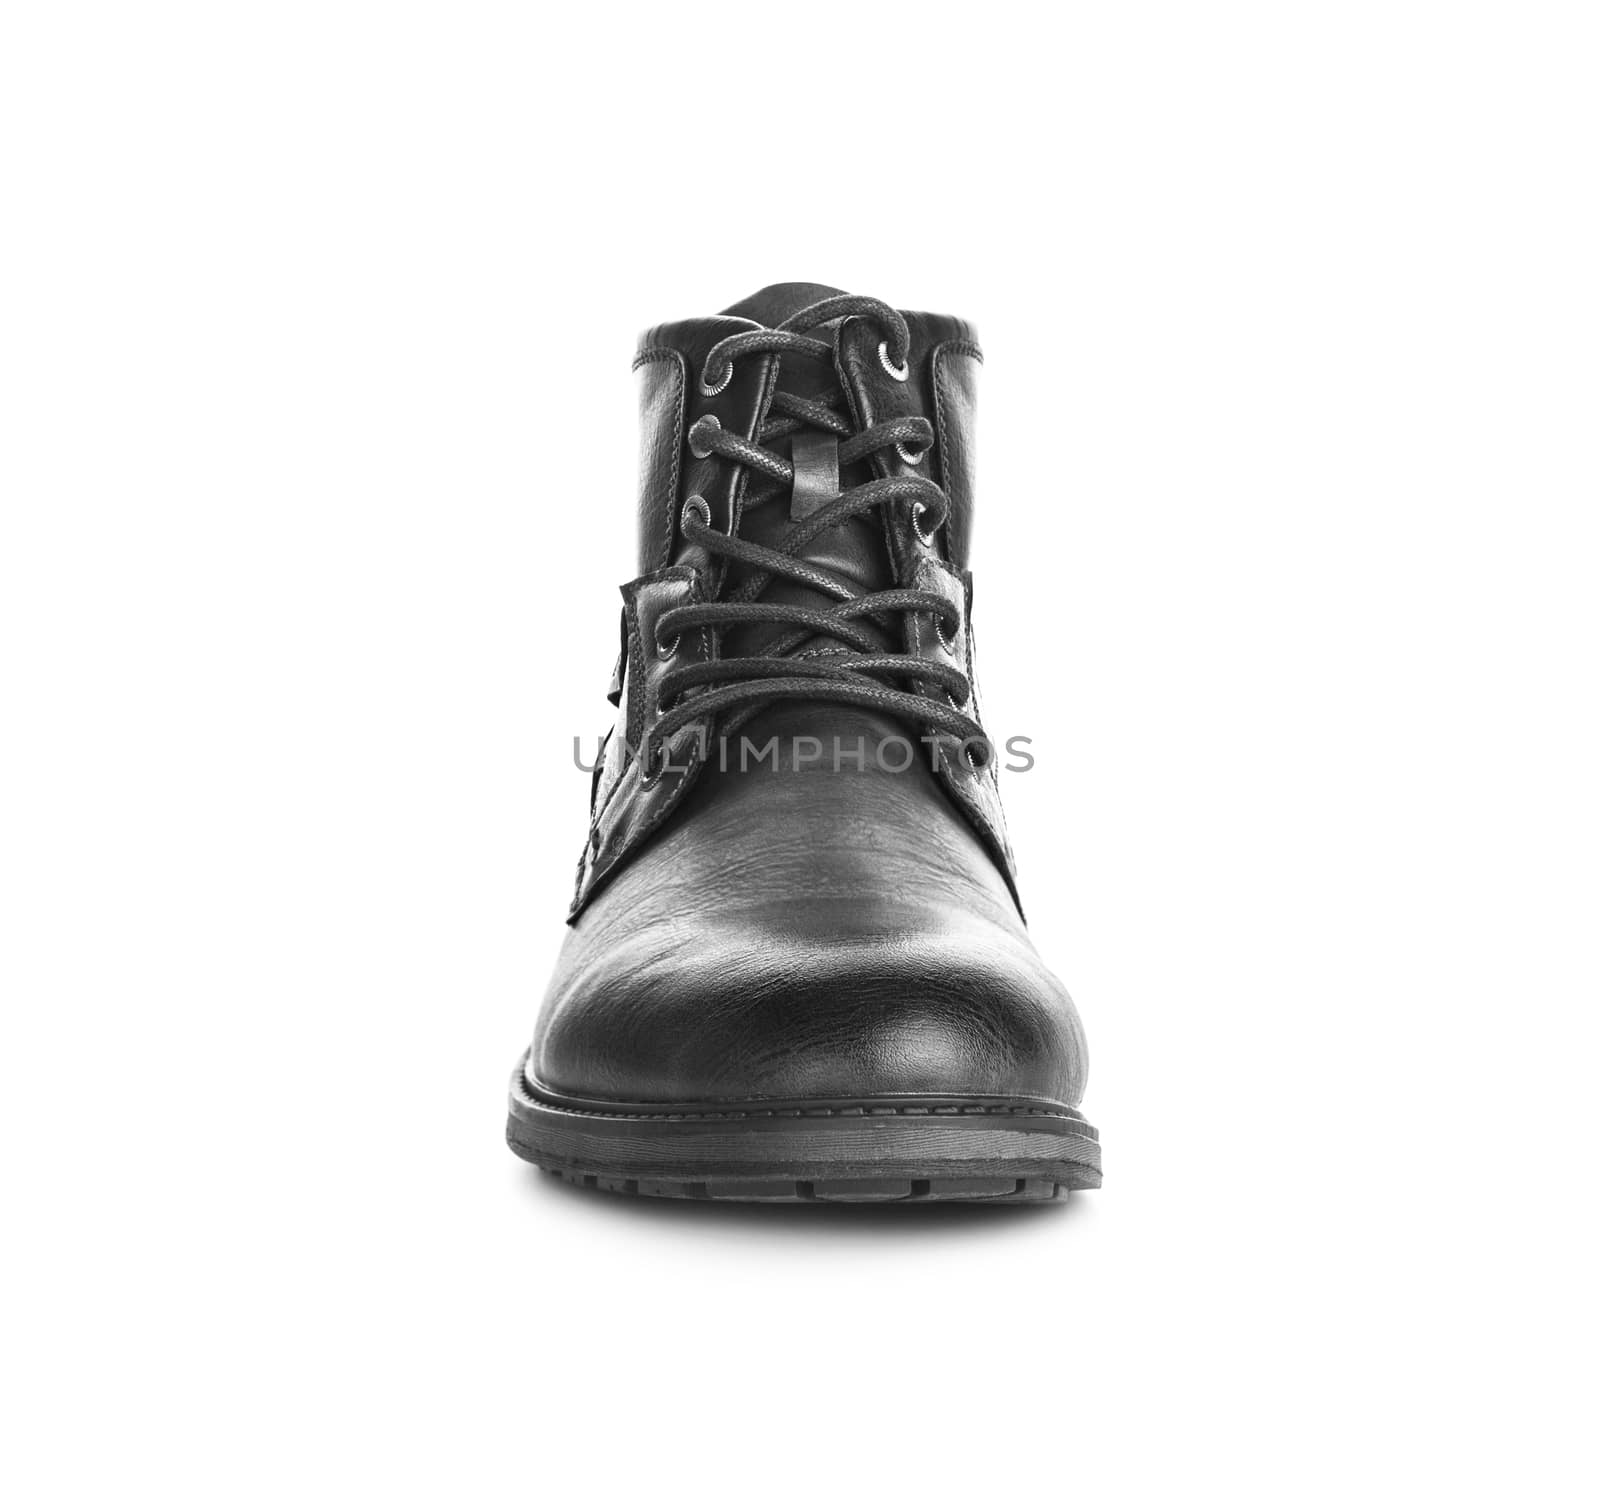 Men's shoes black casual. Isolated on white background by SlayCer